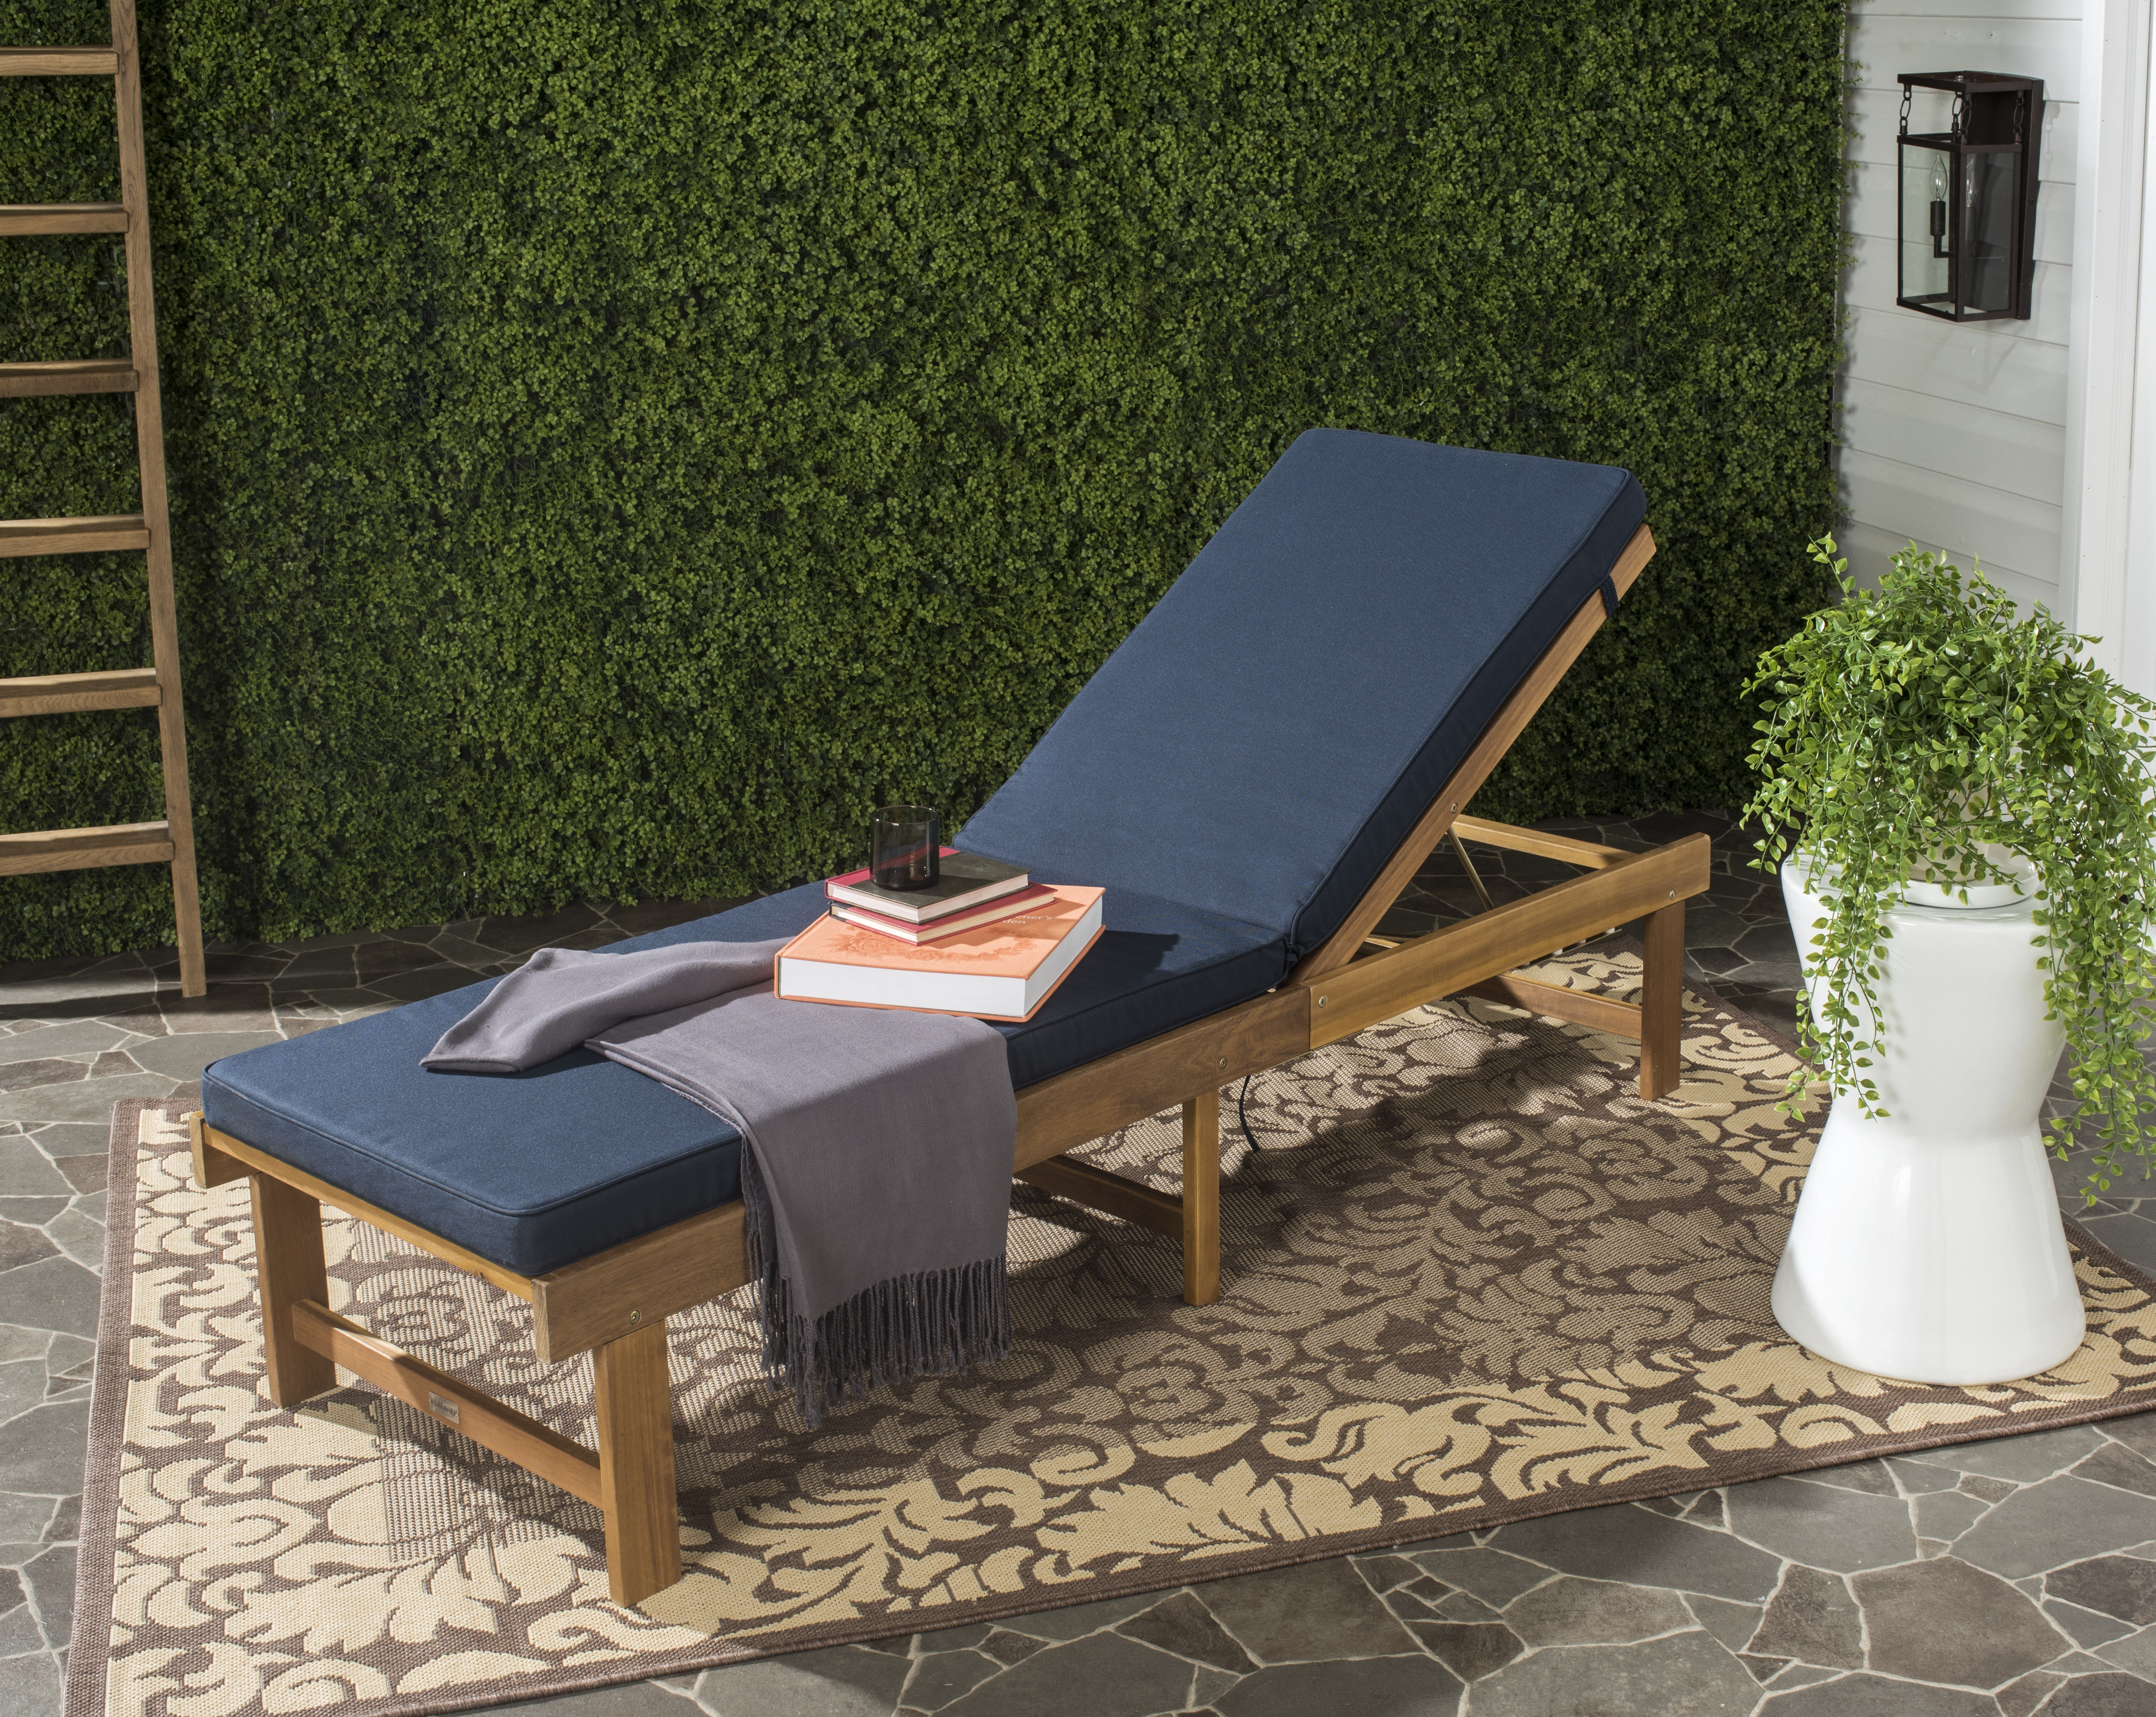 Inglewood Chaise Lounge Chair - Natural/Navy - Safavieh - Image 5